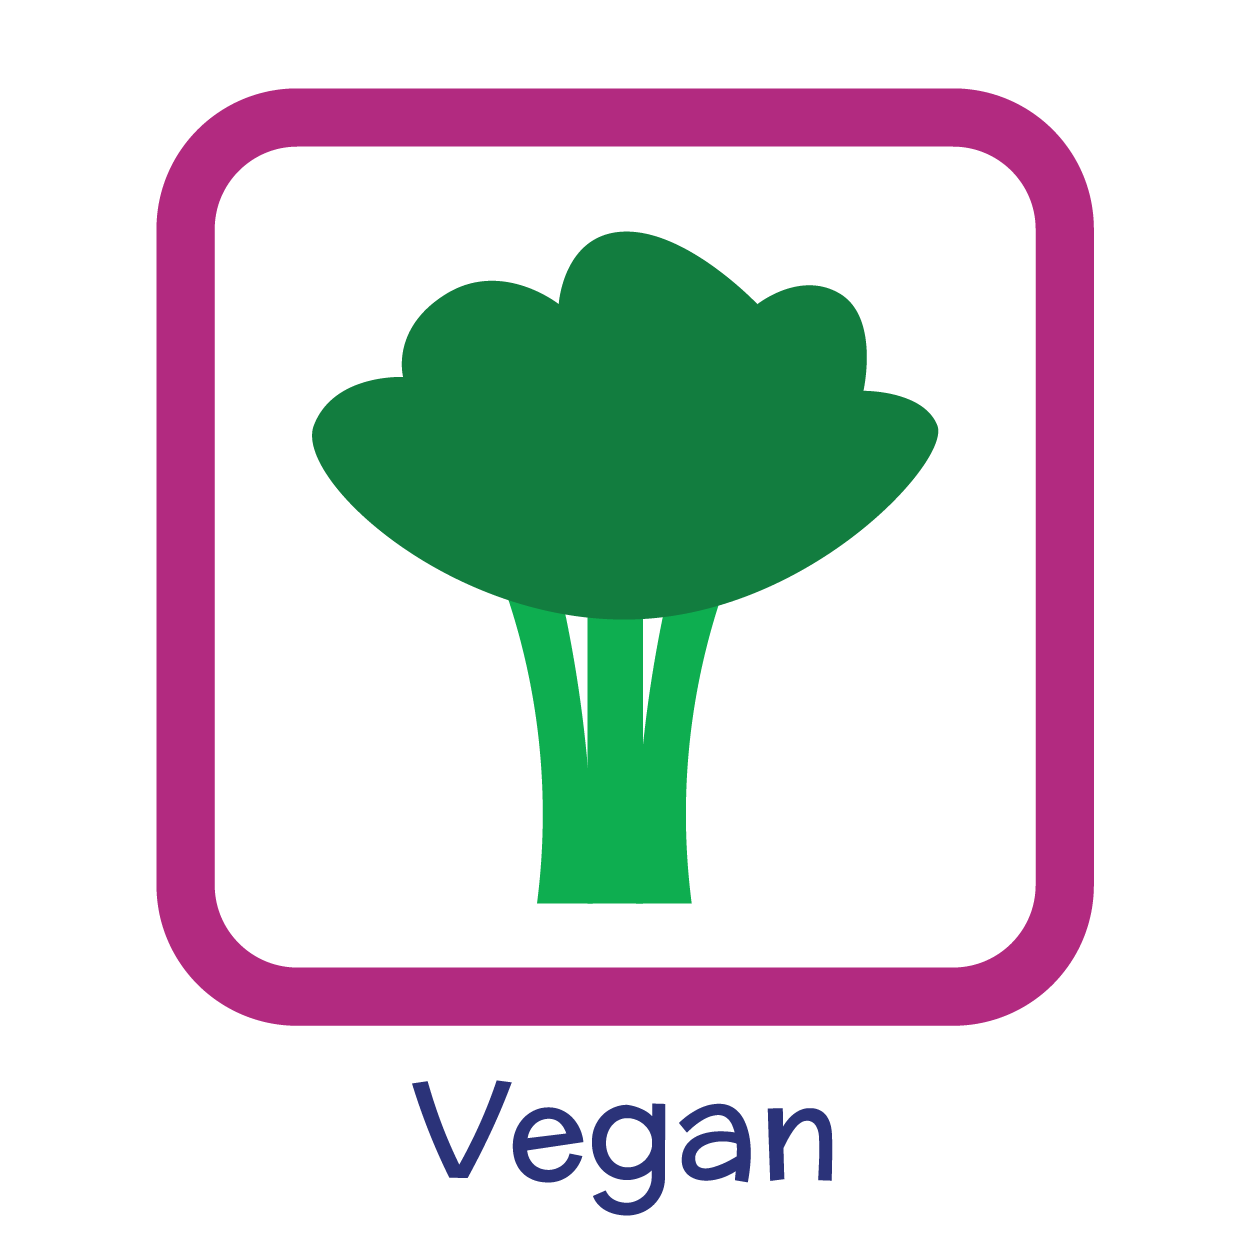 vegan-icon-nomster-chef-11.png